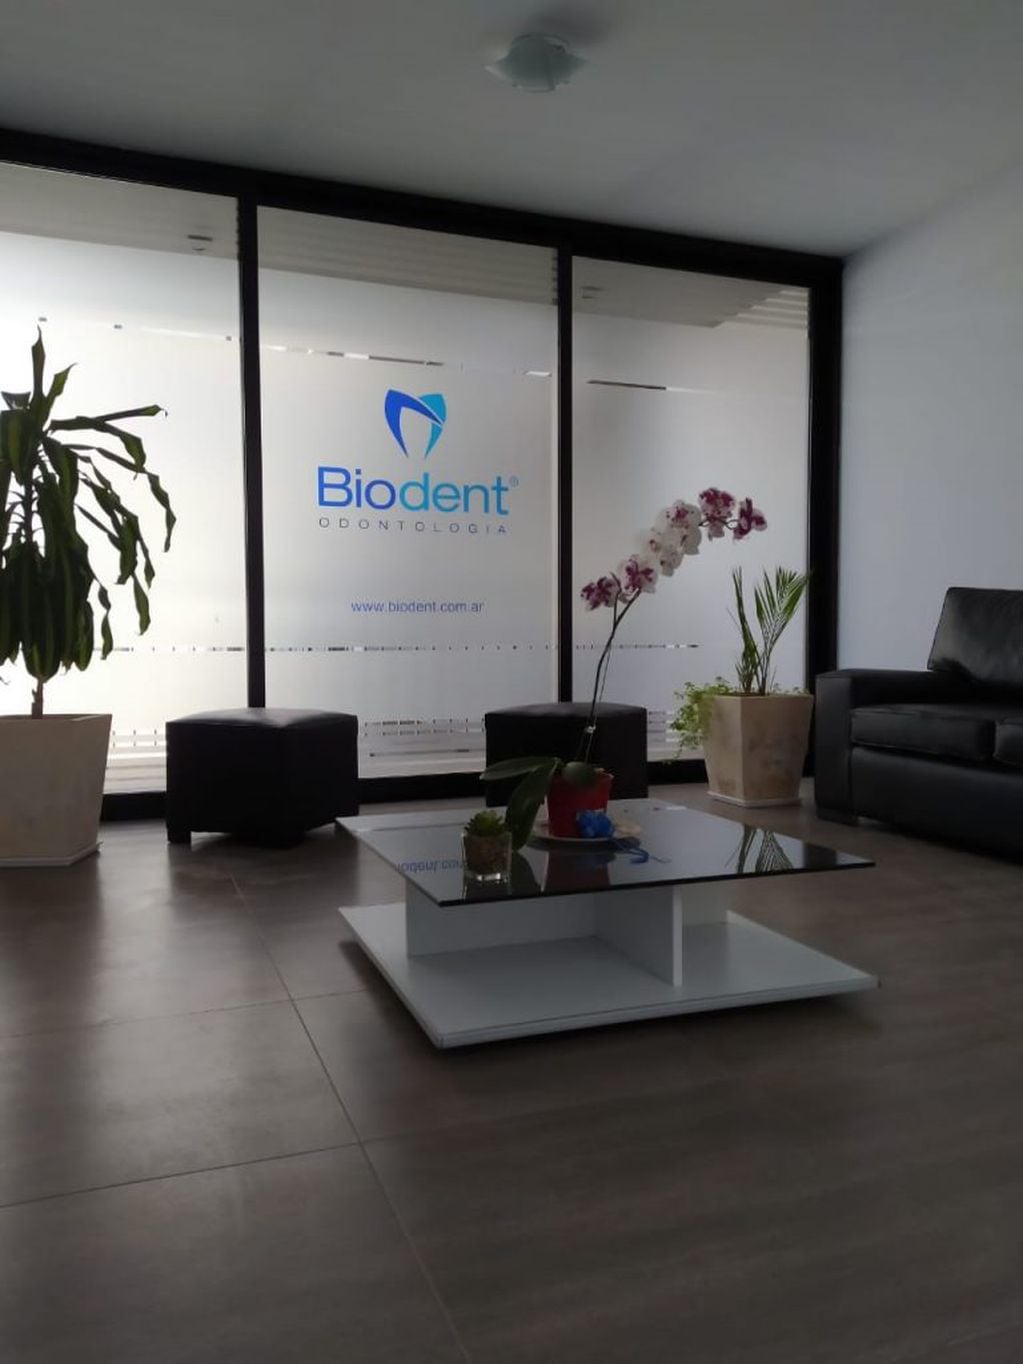 Biodent Arroyito